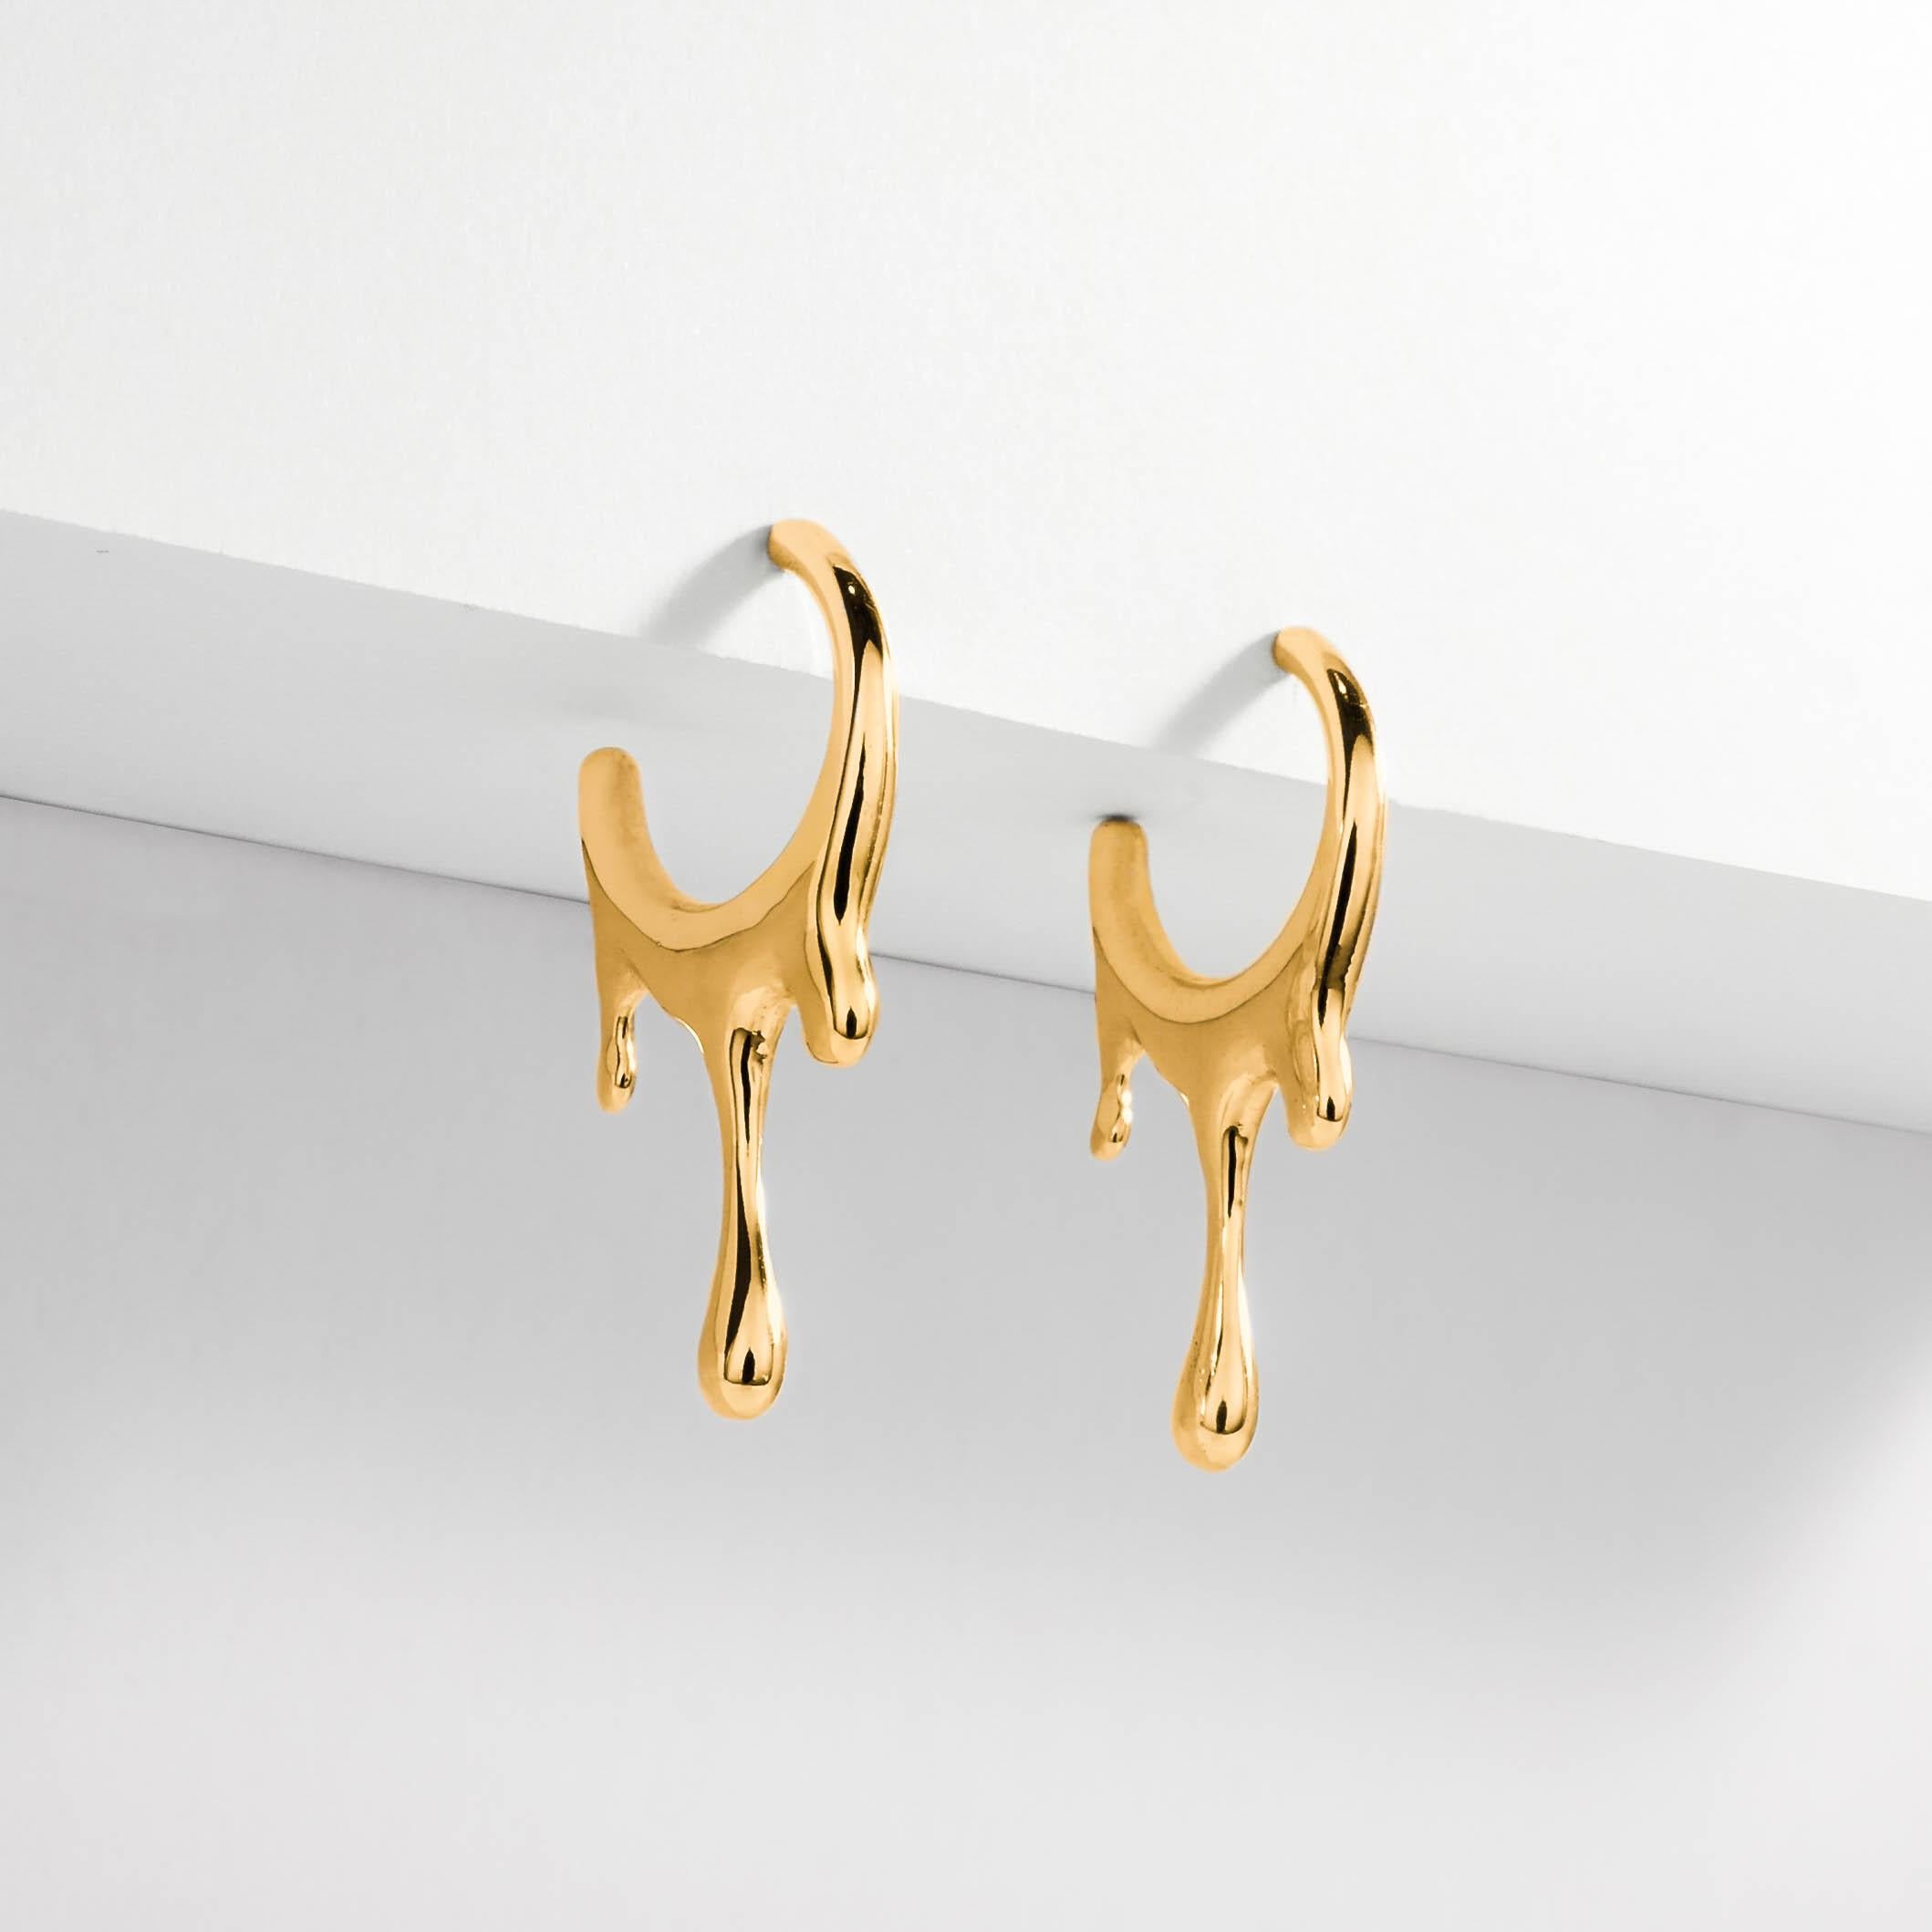 Dripping 24k Gold Vermeil Circular XS Earrings 

Premium Quality Materials:
• 24k Gold Vermeil: Made in 925 Sterling Silver and coated with a thick layer of 24k Yellow Gold to 2.5 Microns thickness
• Sold as a Pair with Butterfly and Silicone